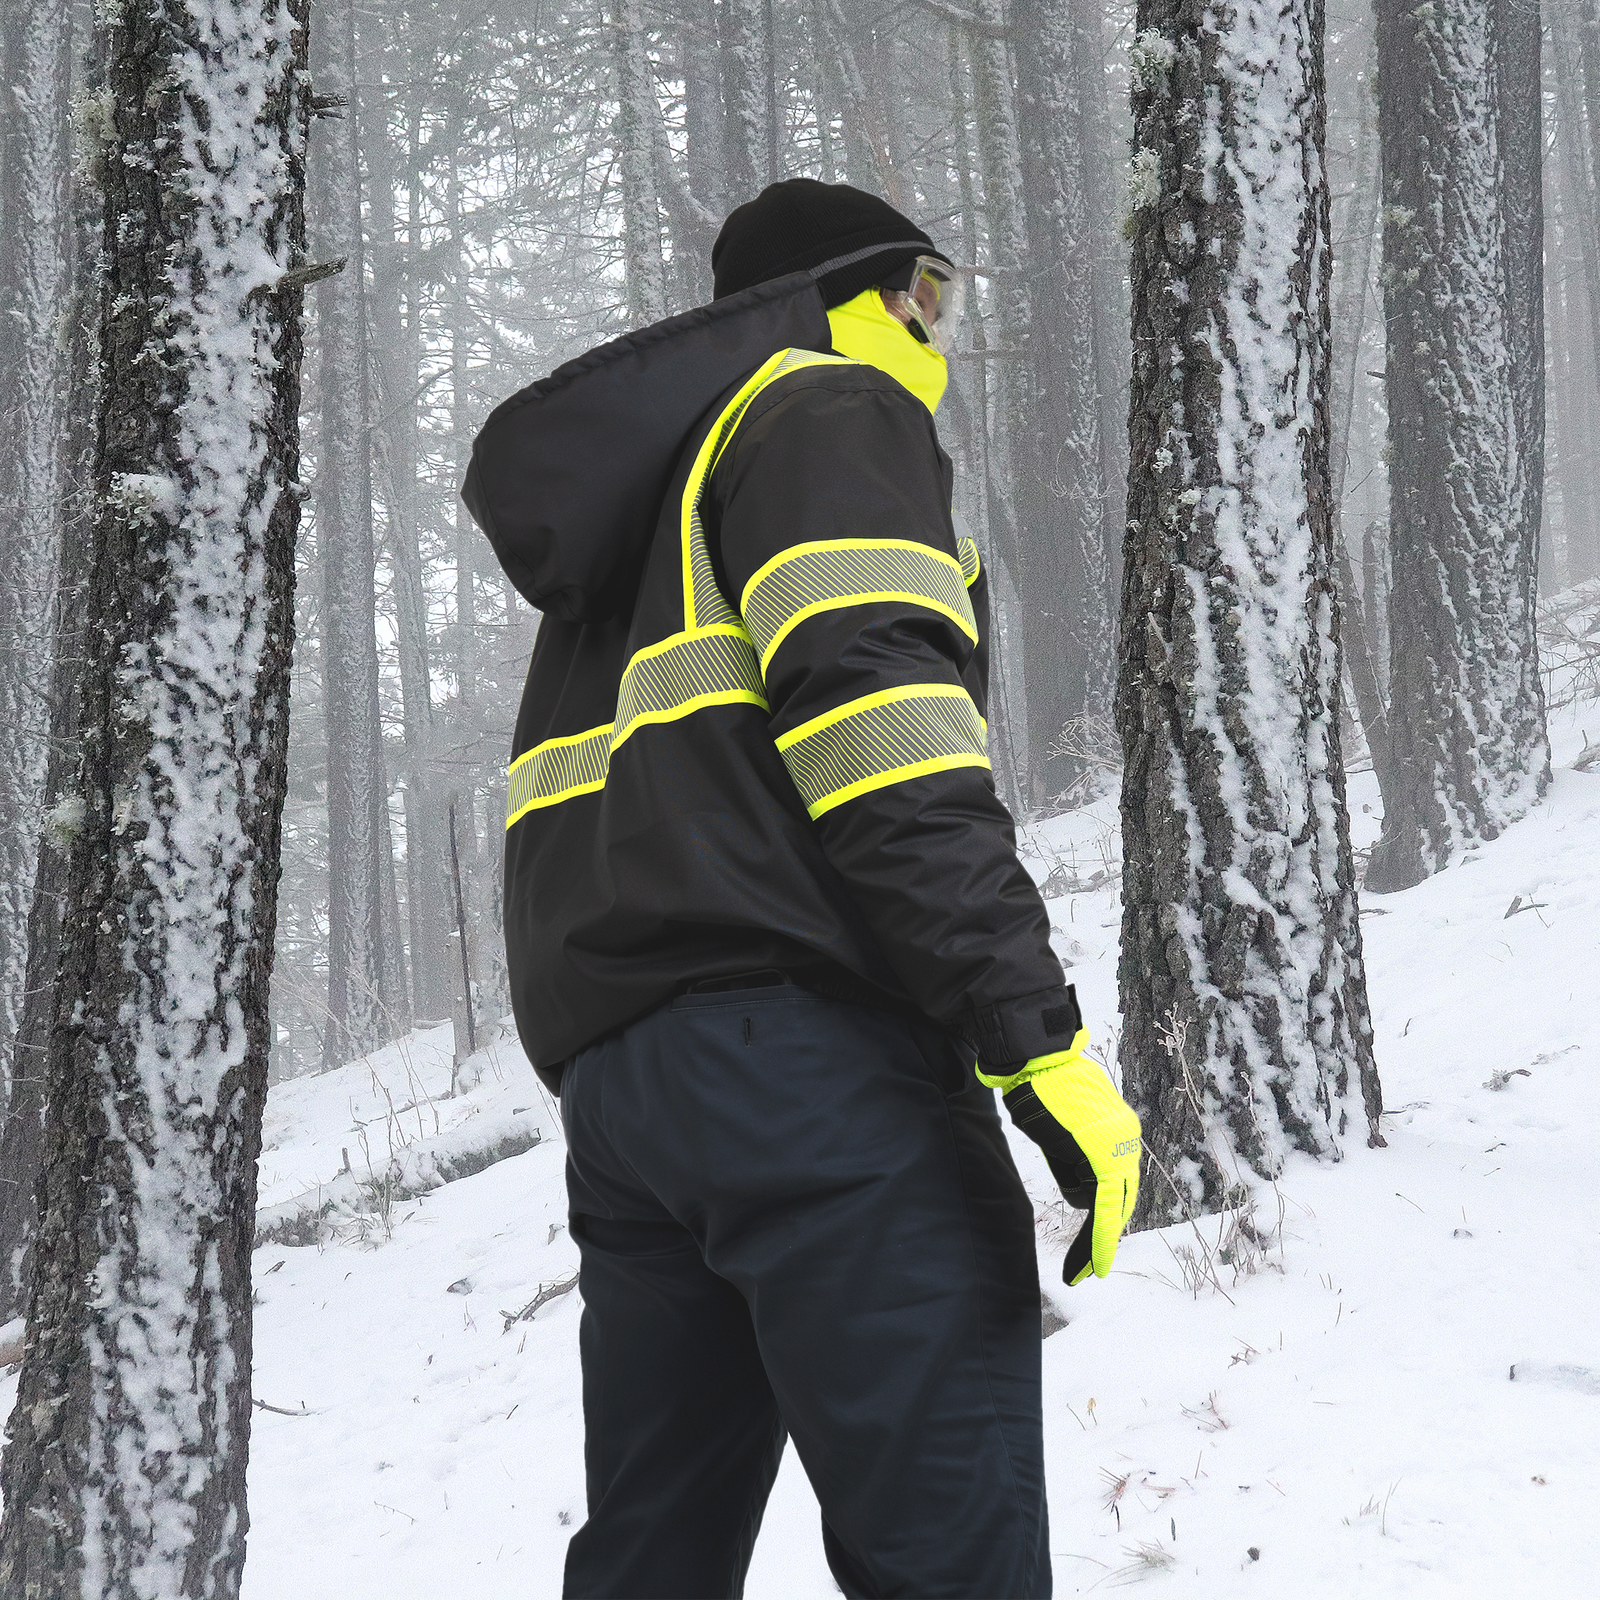 Man wearing the hi vis black safety jacket with heat transfer reflective tapes and removable hood for extreme cold weather